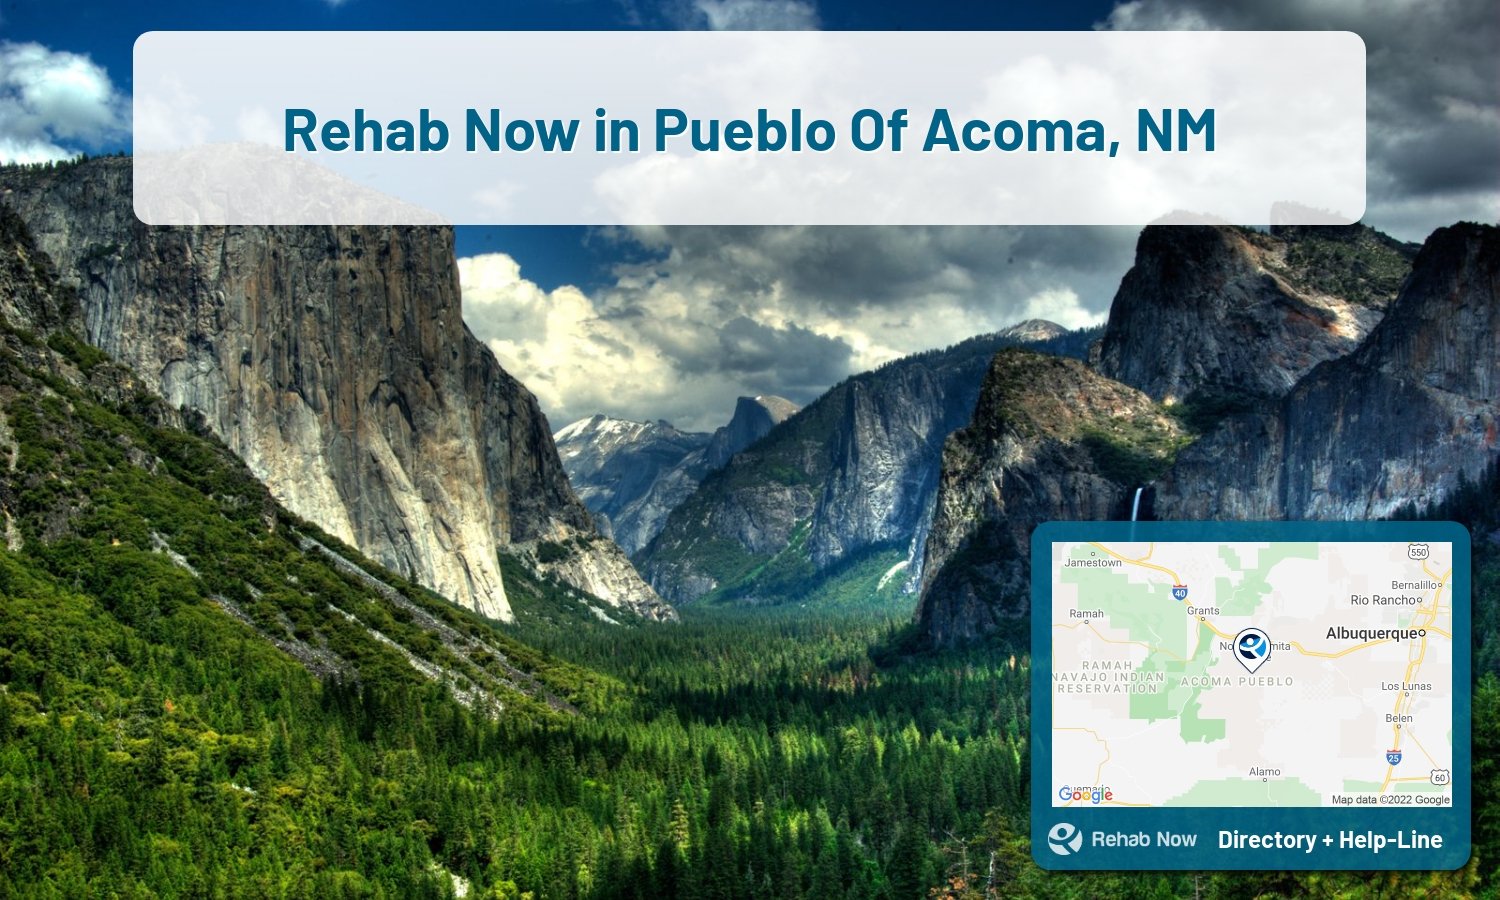 Find drug rehab and alcohol treatment services in Pueblo Of Acoma. Our experts help you find a center in Pueblo Of Acoma, New Mexico